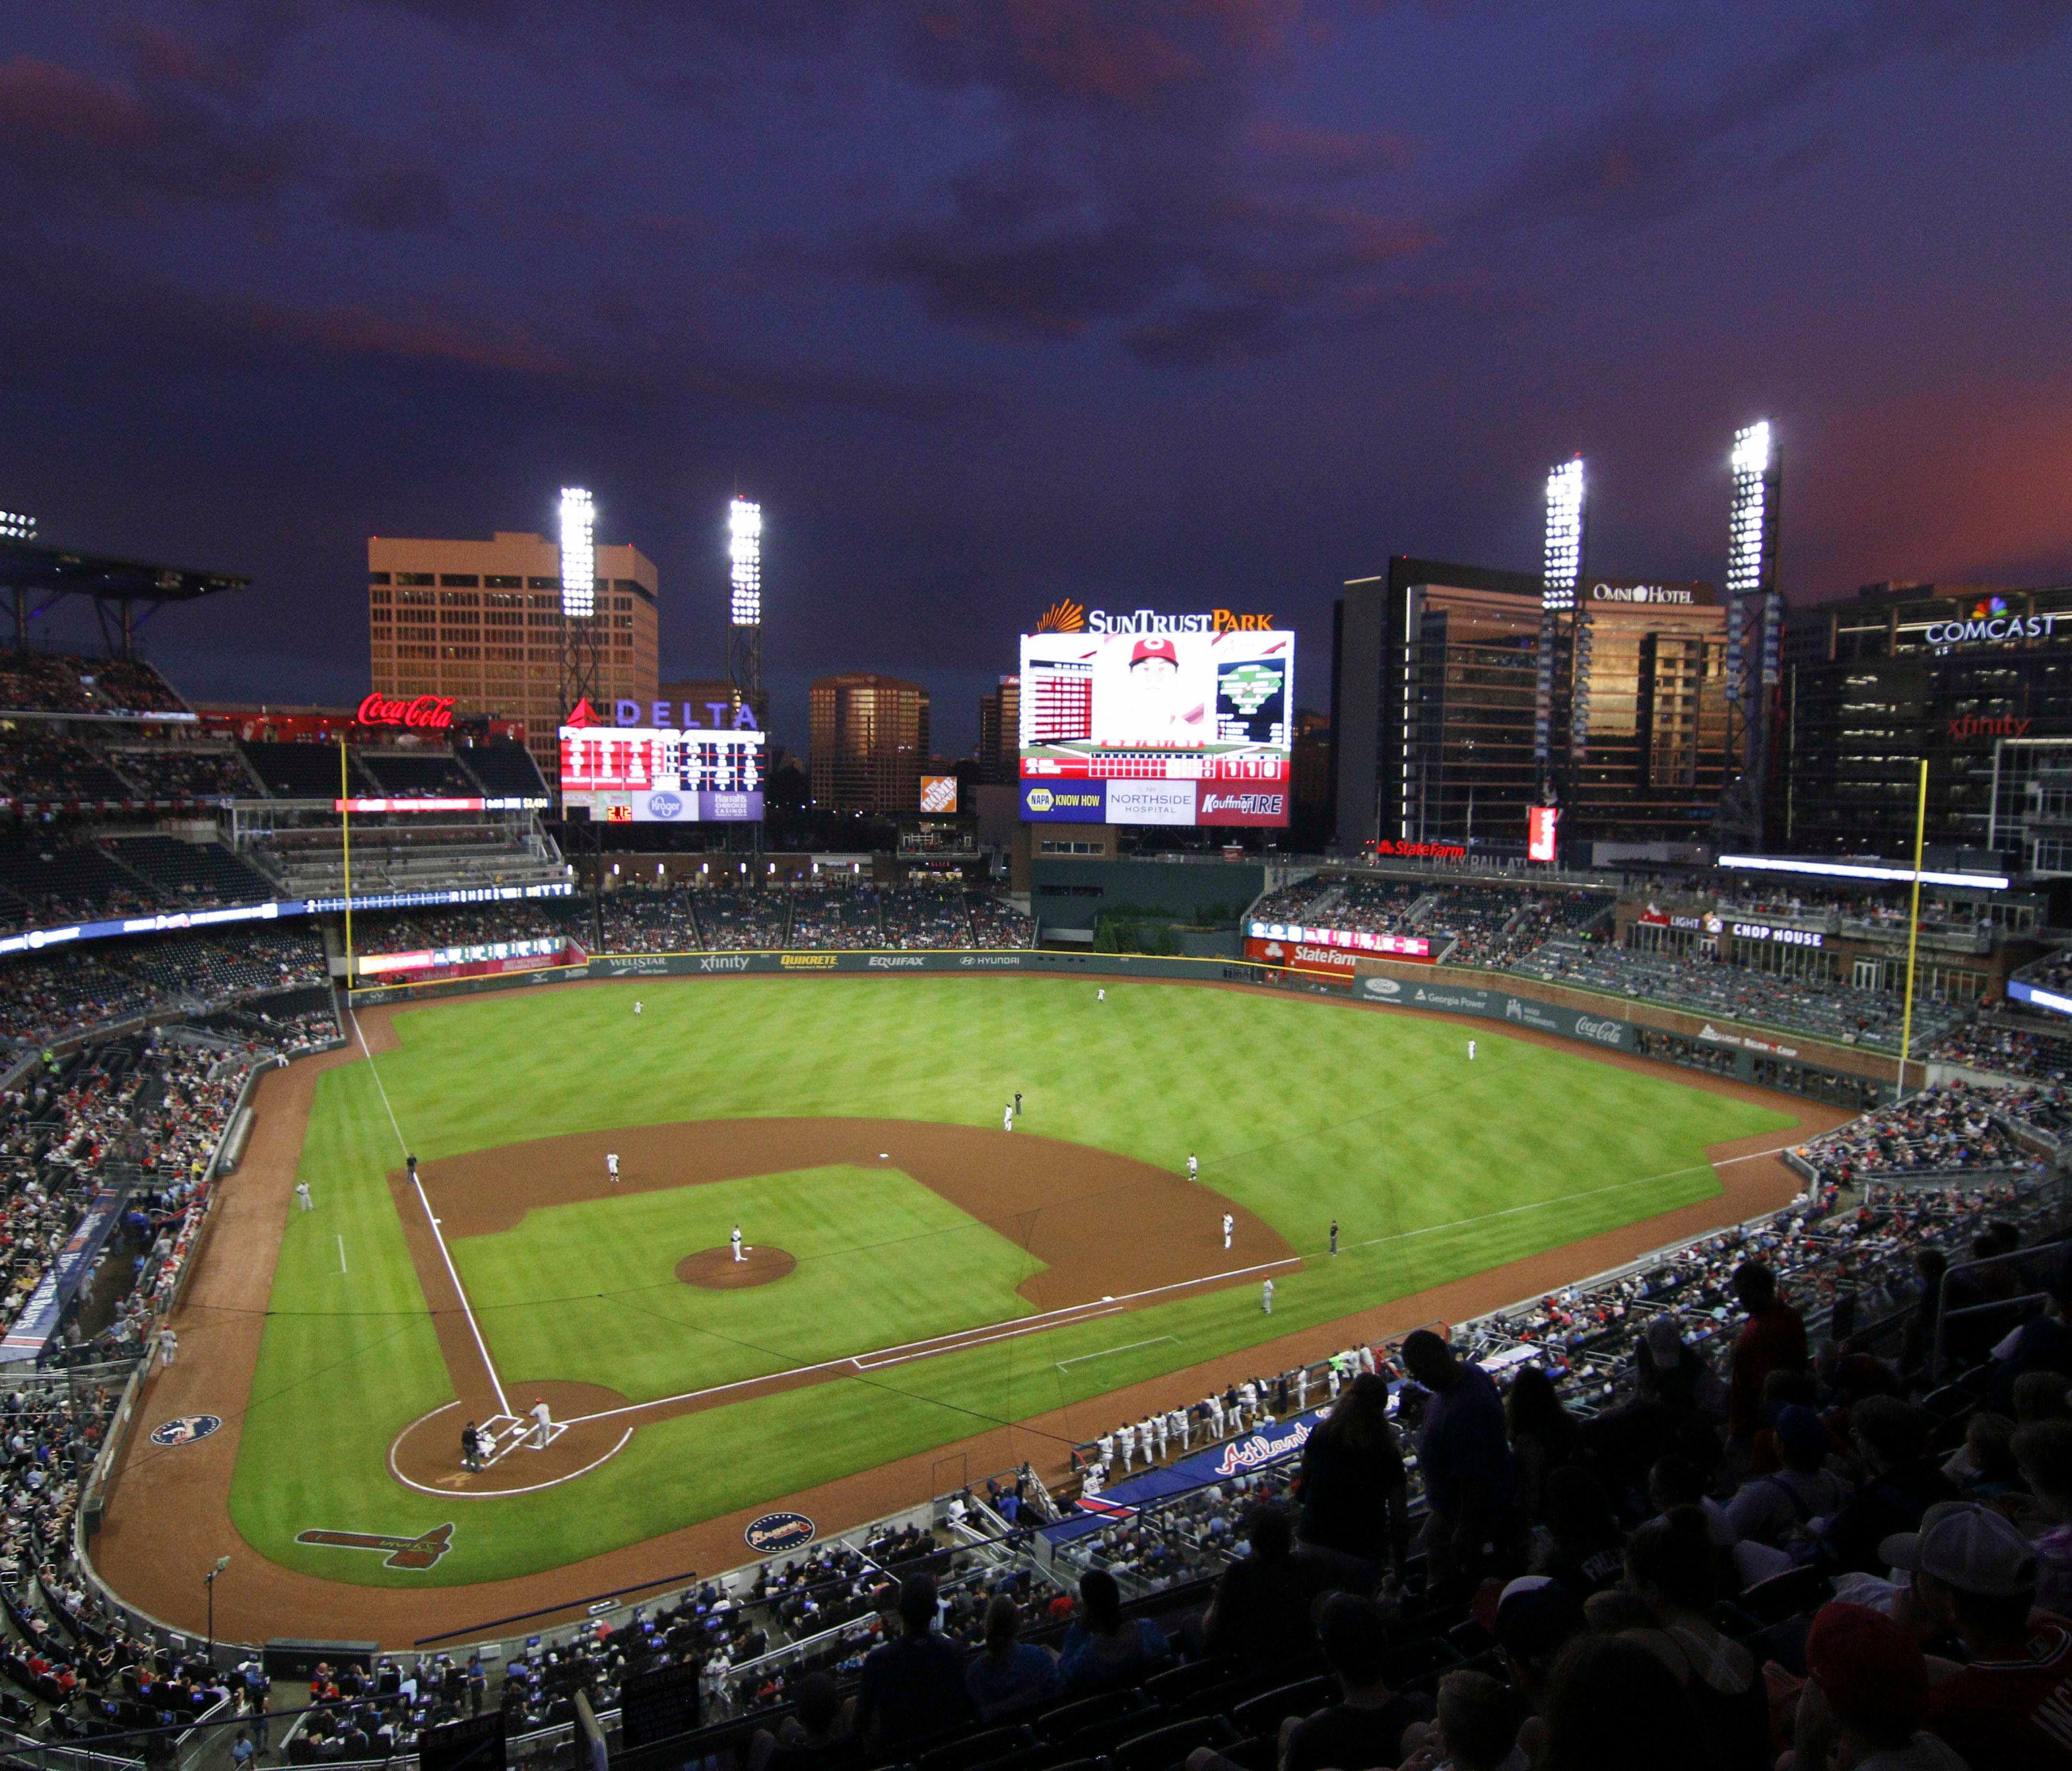 SunTrust Park has been the Atlanta Braves' home park for the past two seasons.